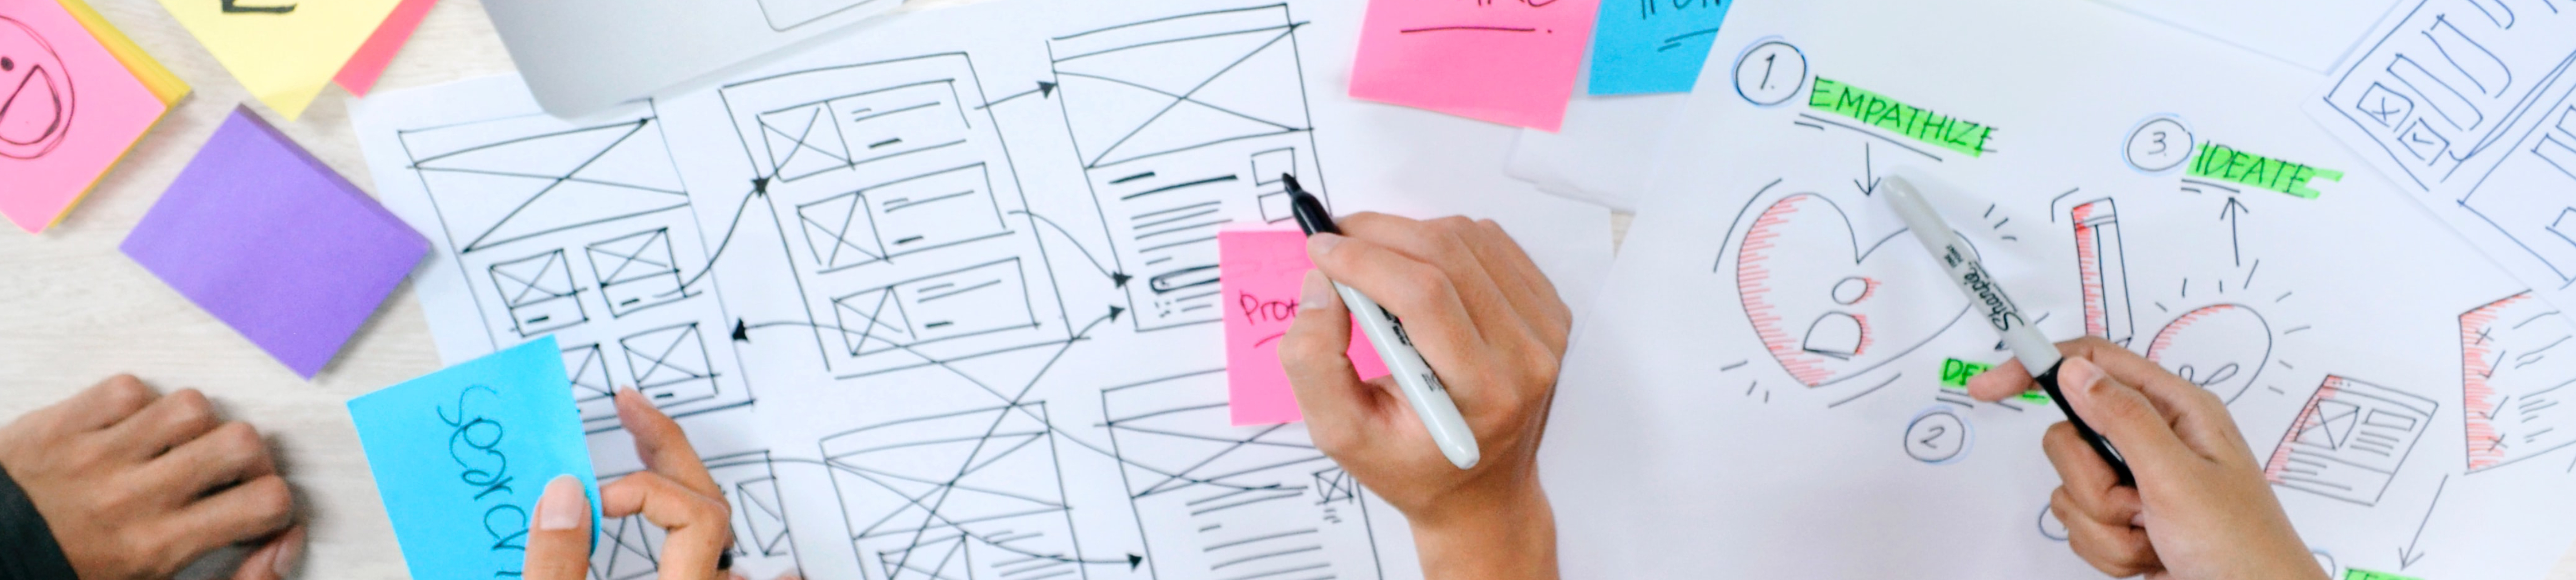 A photo of people writing on and placing sticky notes on a series of diagrams and sketches